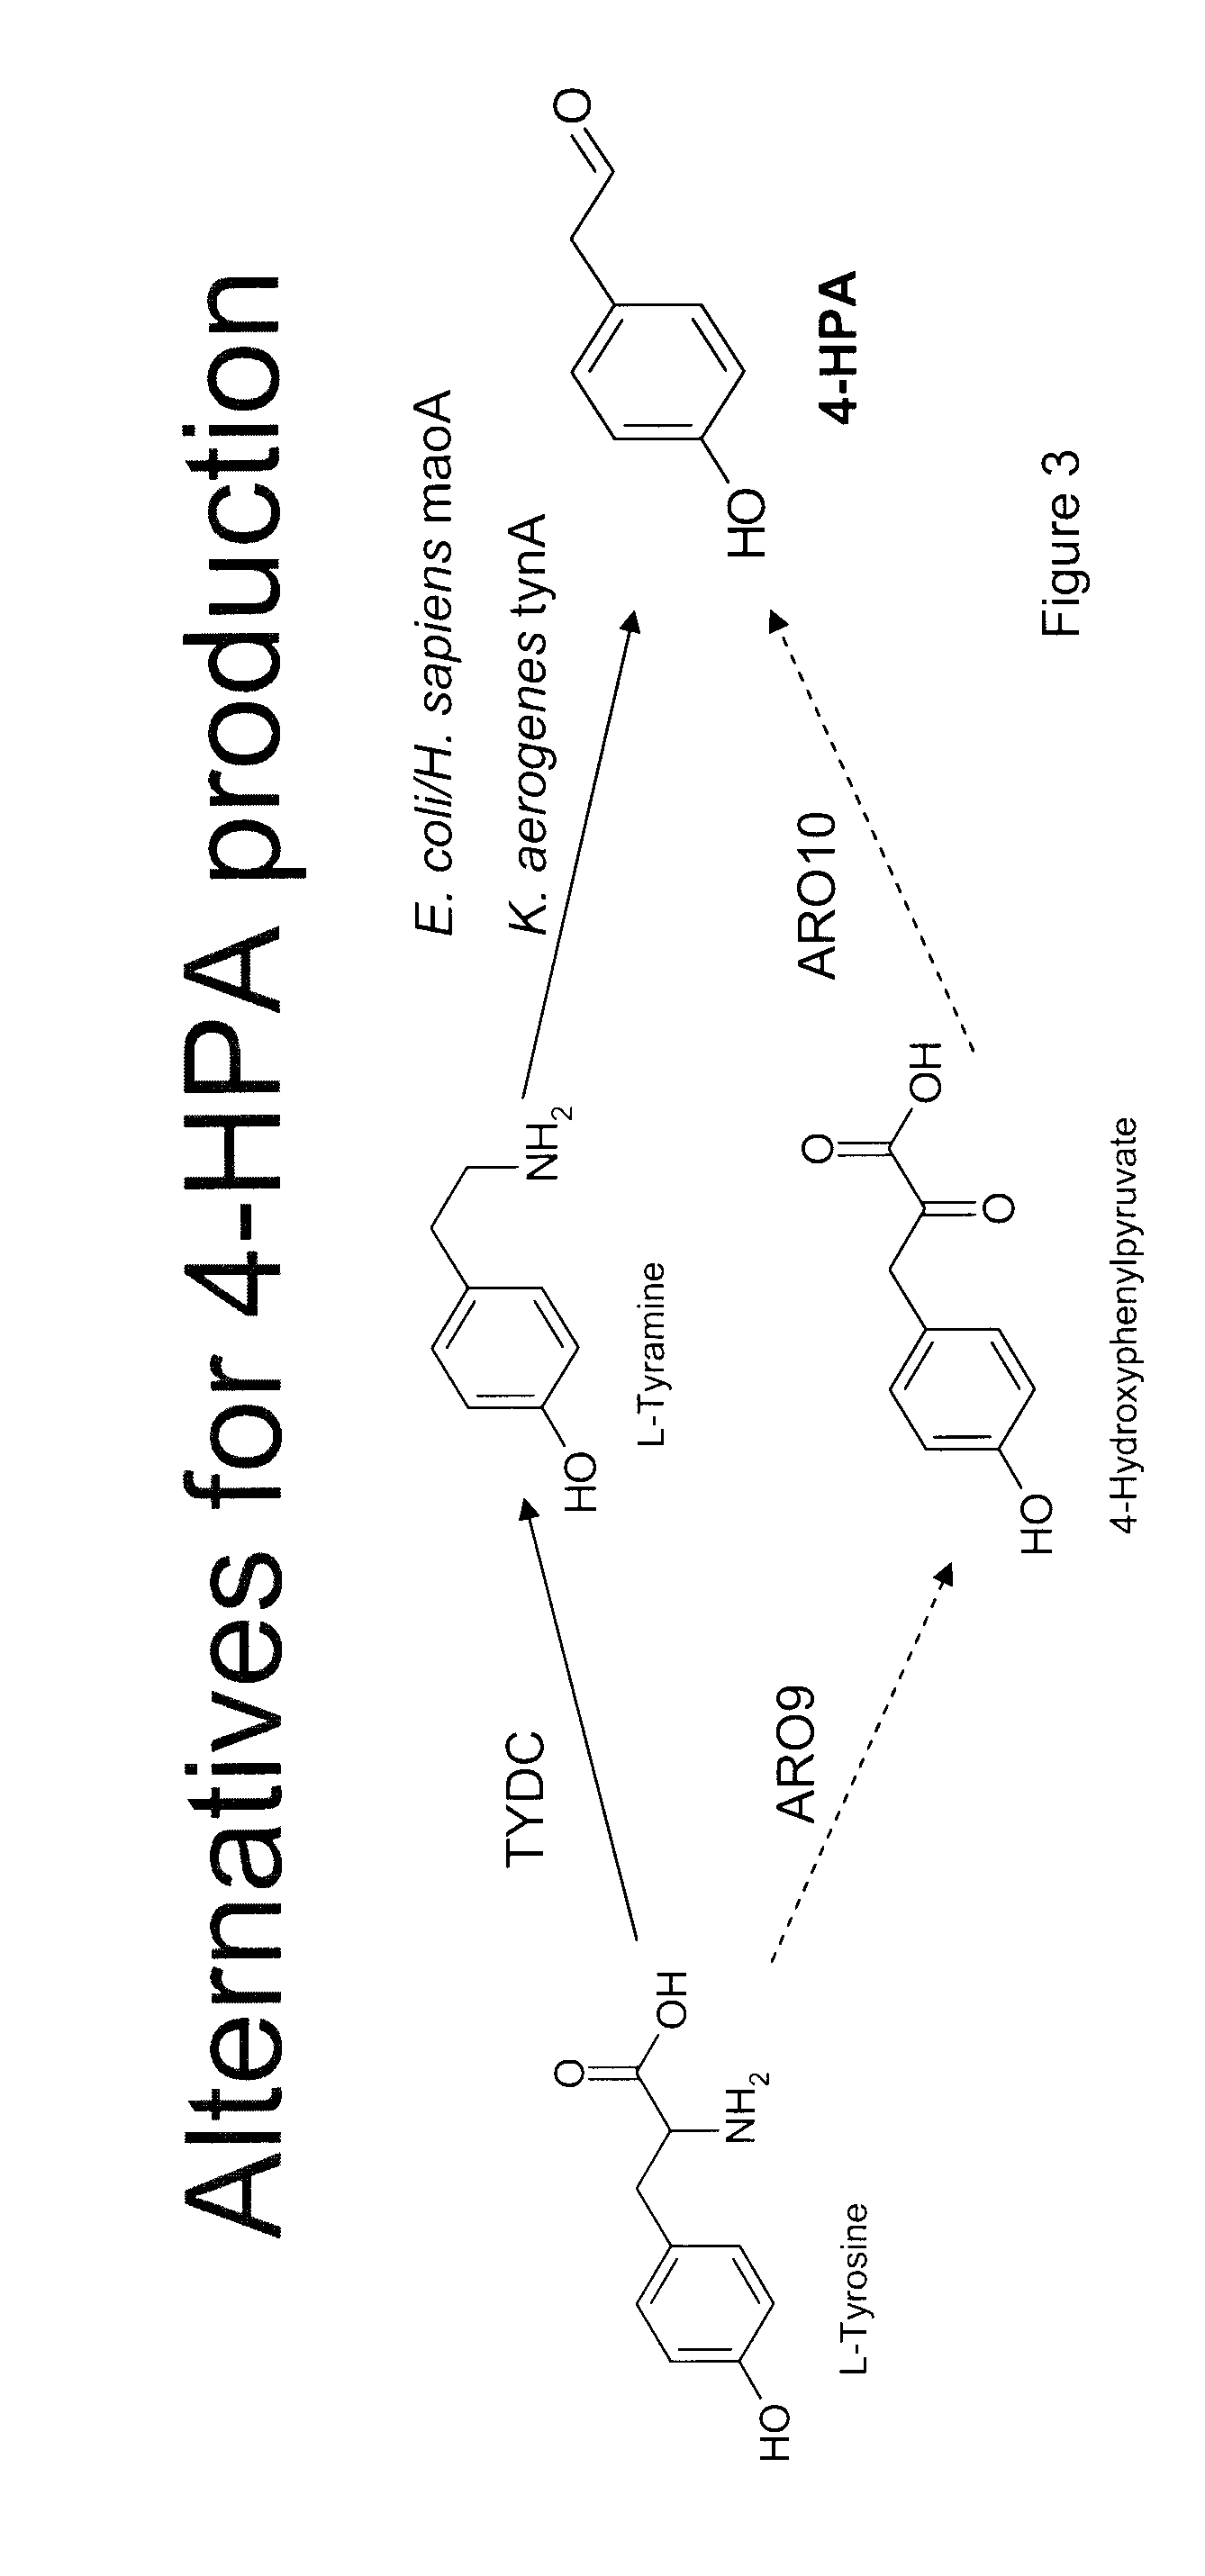 Compositions and methods for producing benzylisoquinoline alkaloids